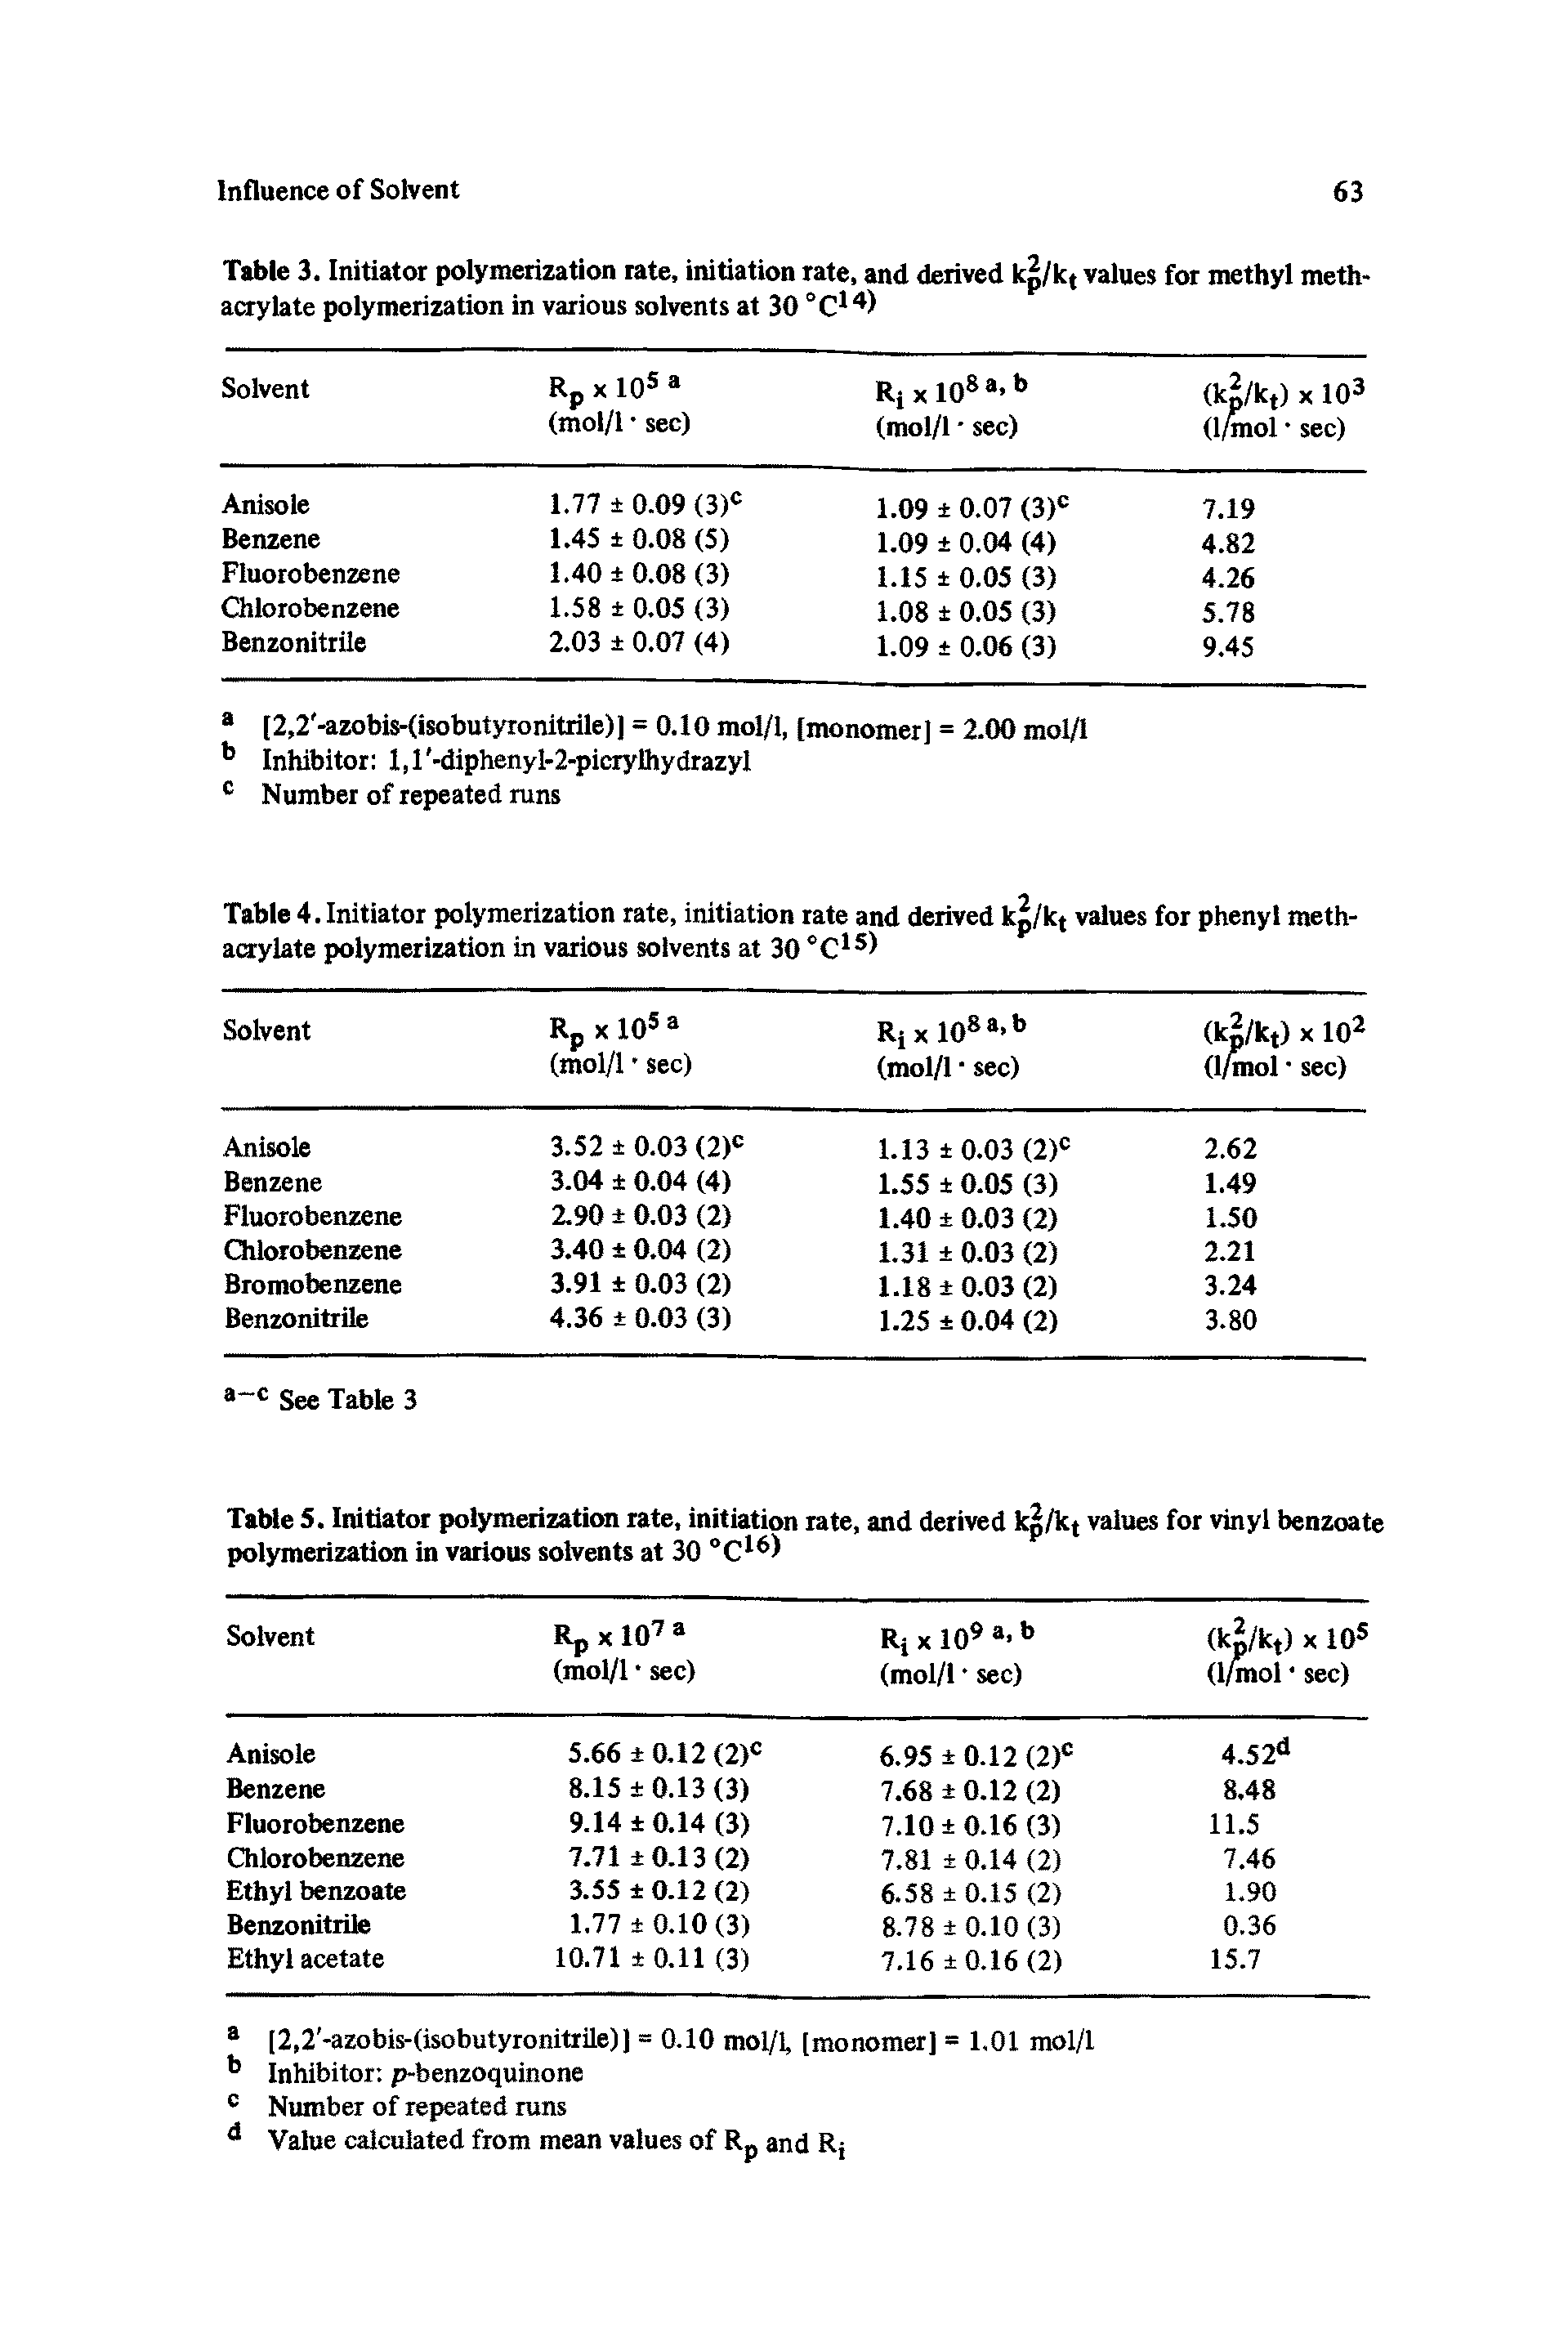 Table 3. Initiator polymerization rate, initiation rate, and derived k /k, values for methyl methacrylate polymerization in various solvents at 30 °C14)...